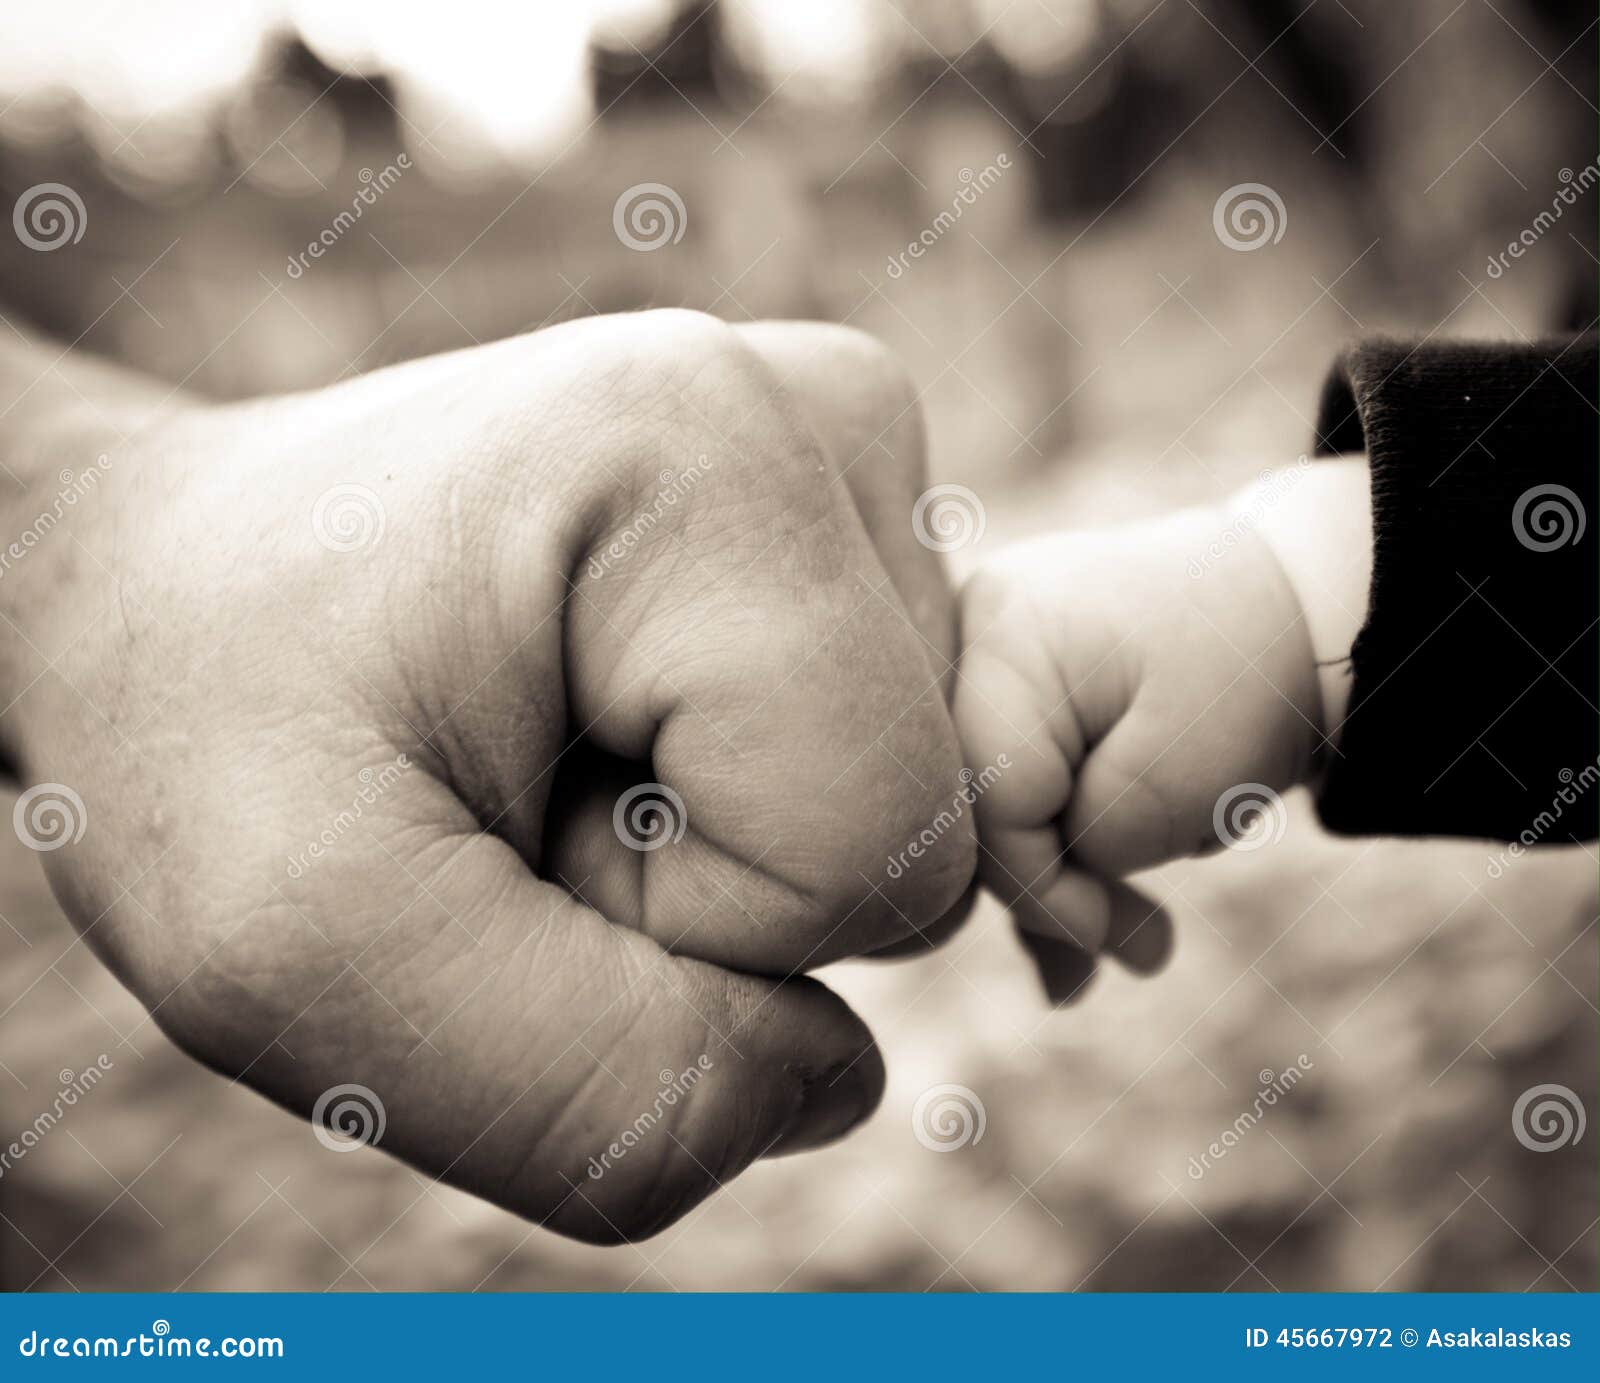 dad and baby fist bump